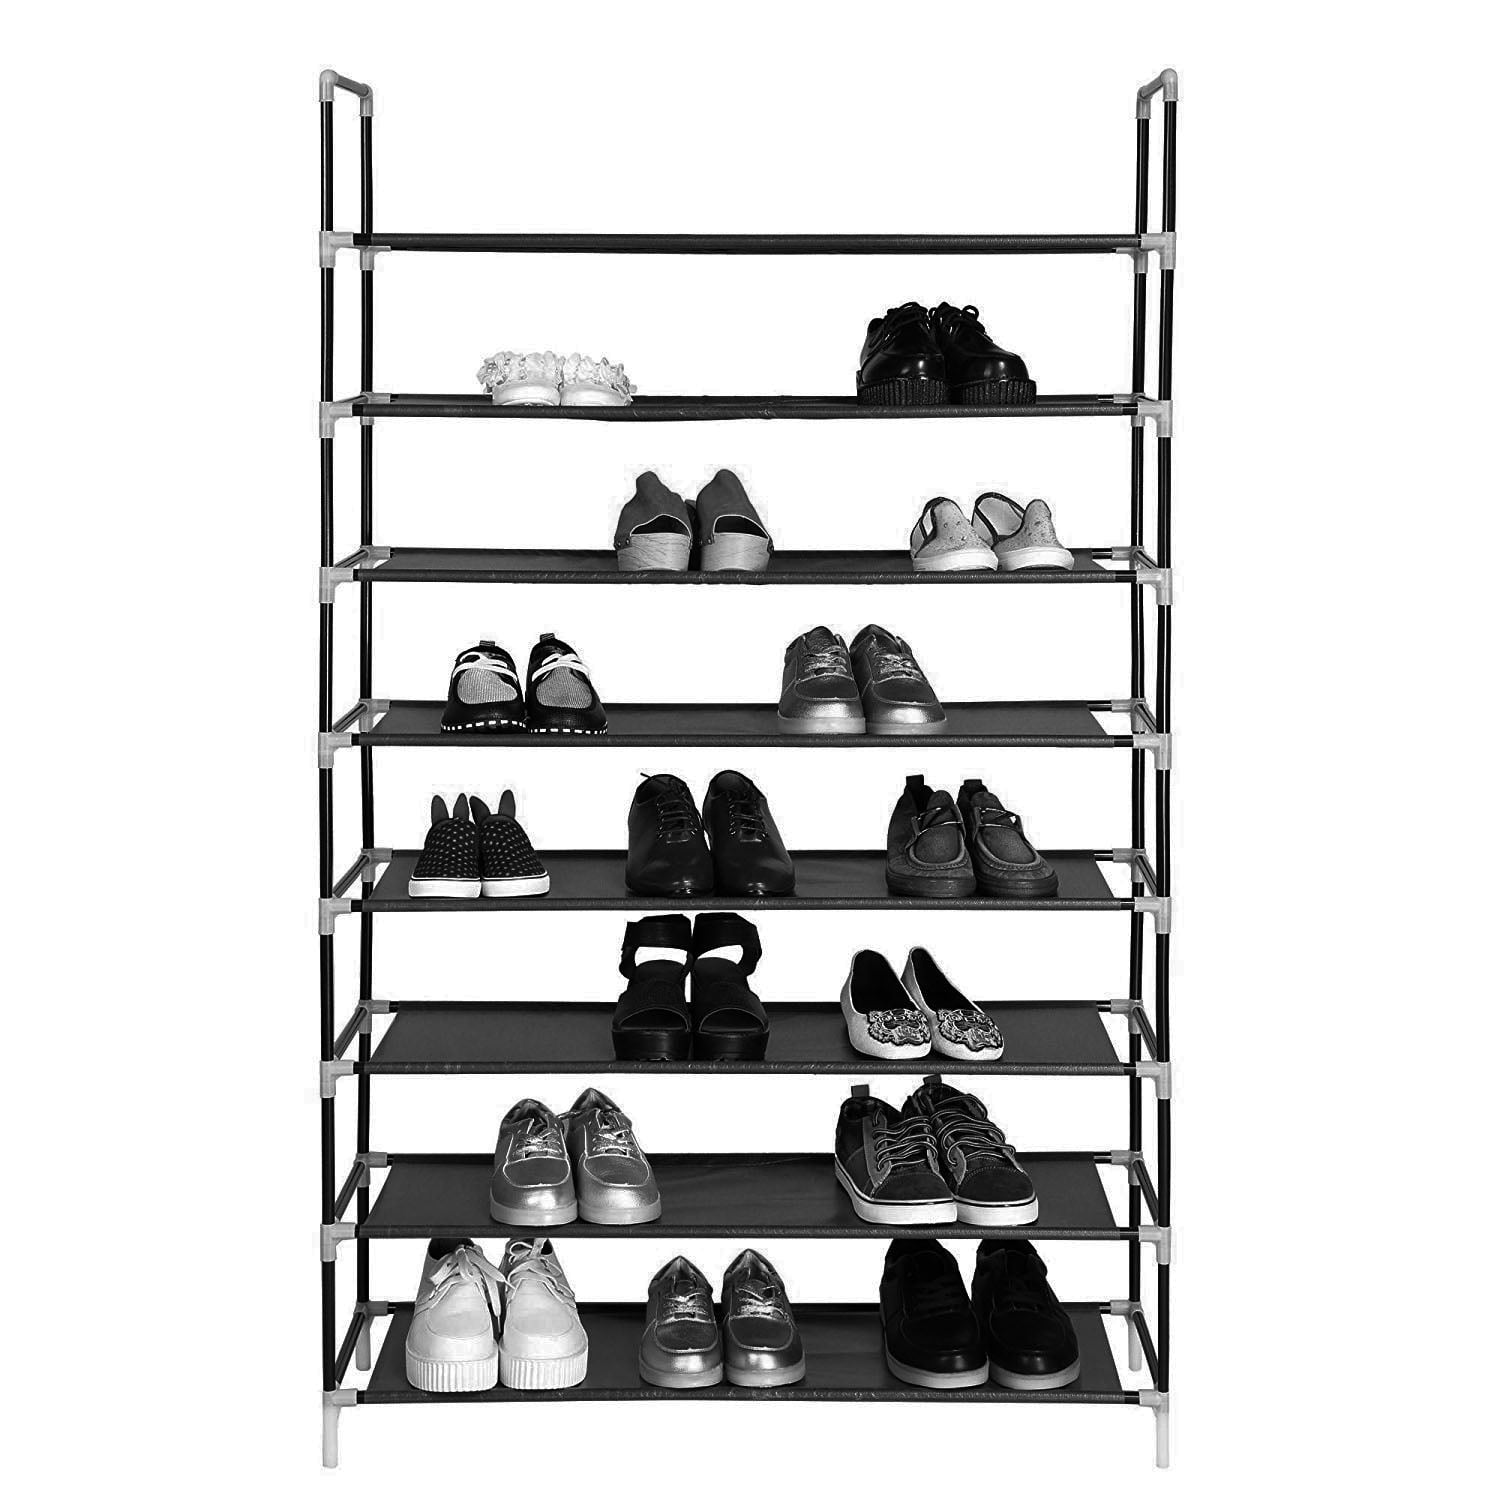 Details about   METAL CHROME EXTENDABLE SHOE RACK STORAGE SHELVES BOOT STAND ORGANISER STACKABLE 